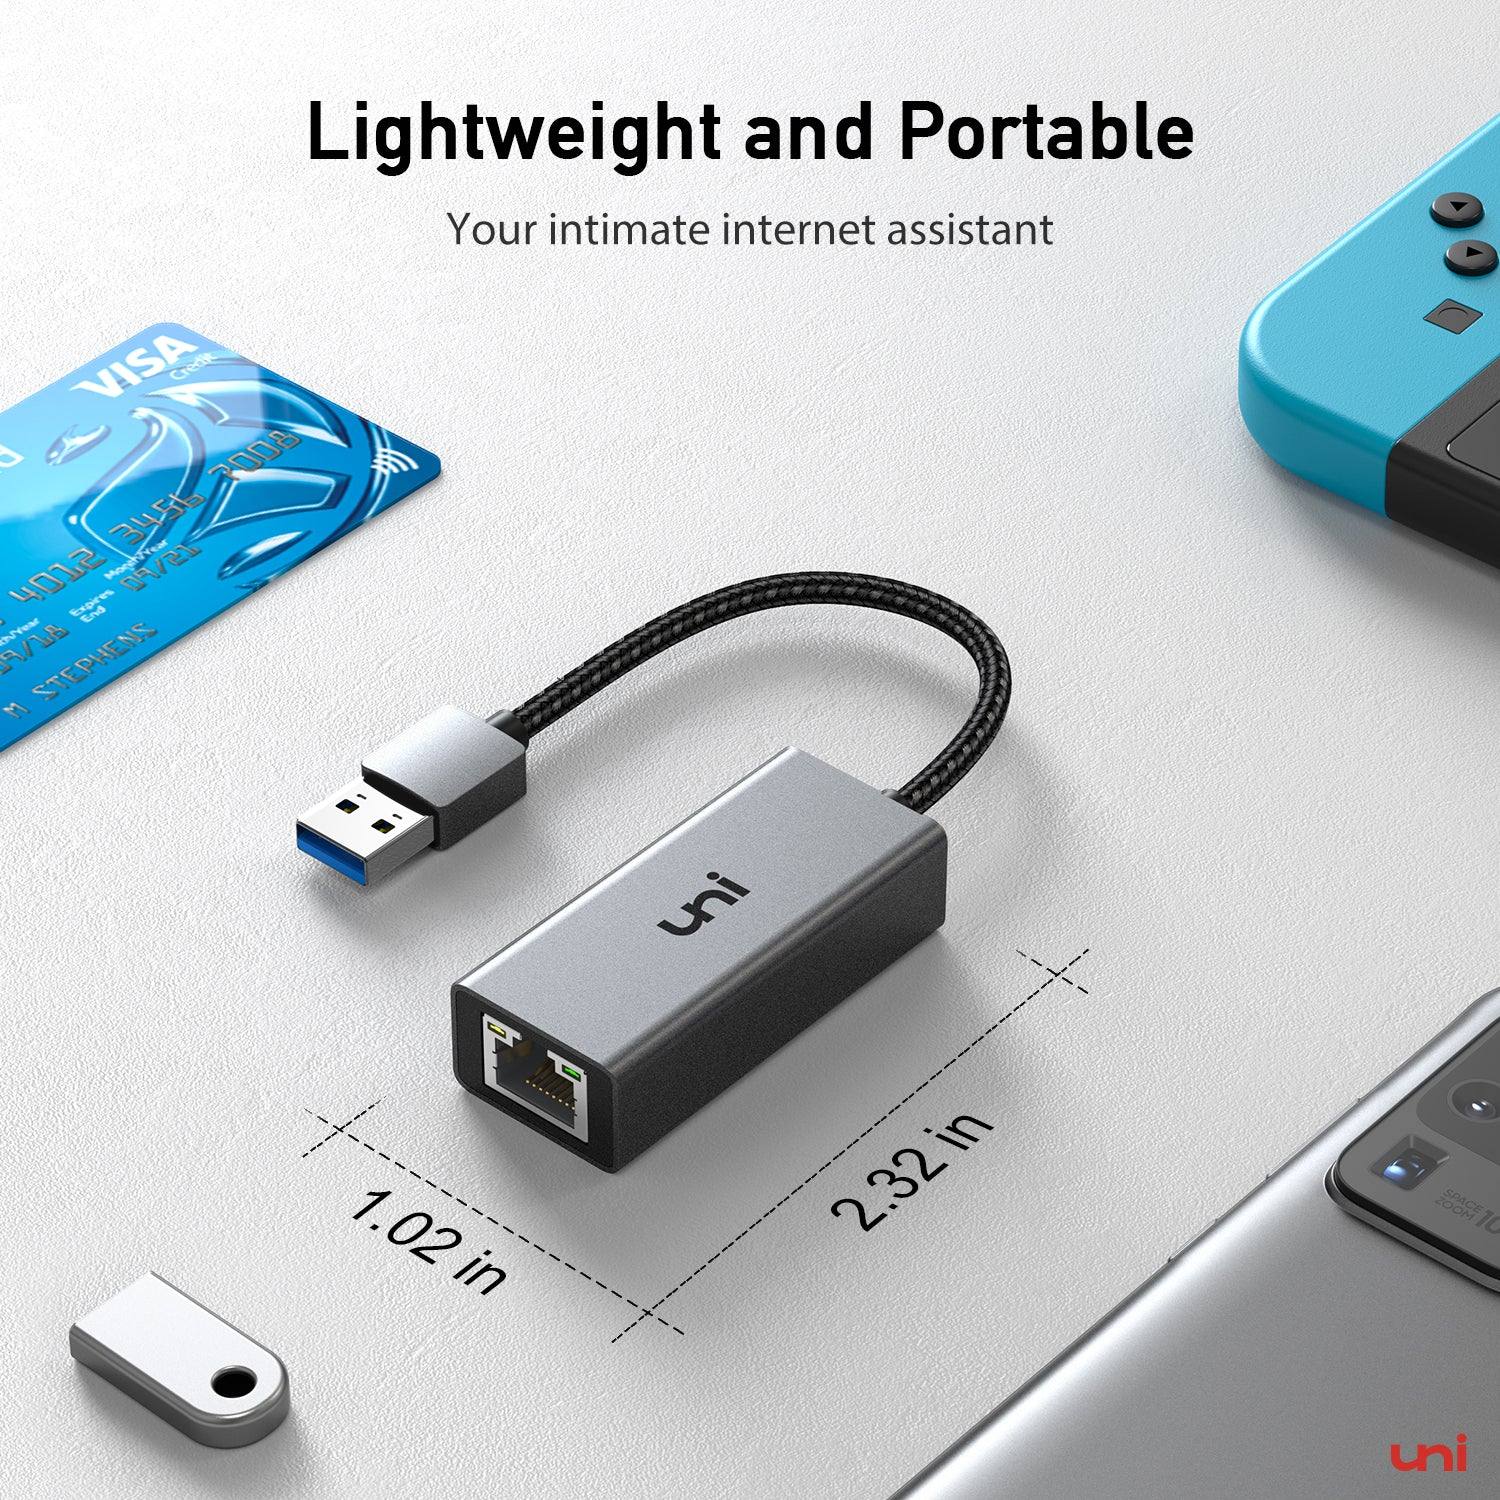 Nintendo Switch USB 3.0 LAN Adapter for Nintendo Switch, 1Gbps